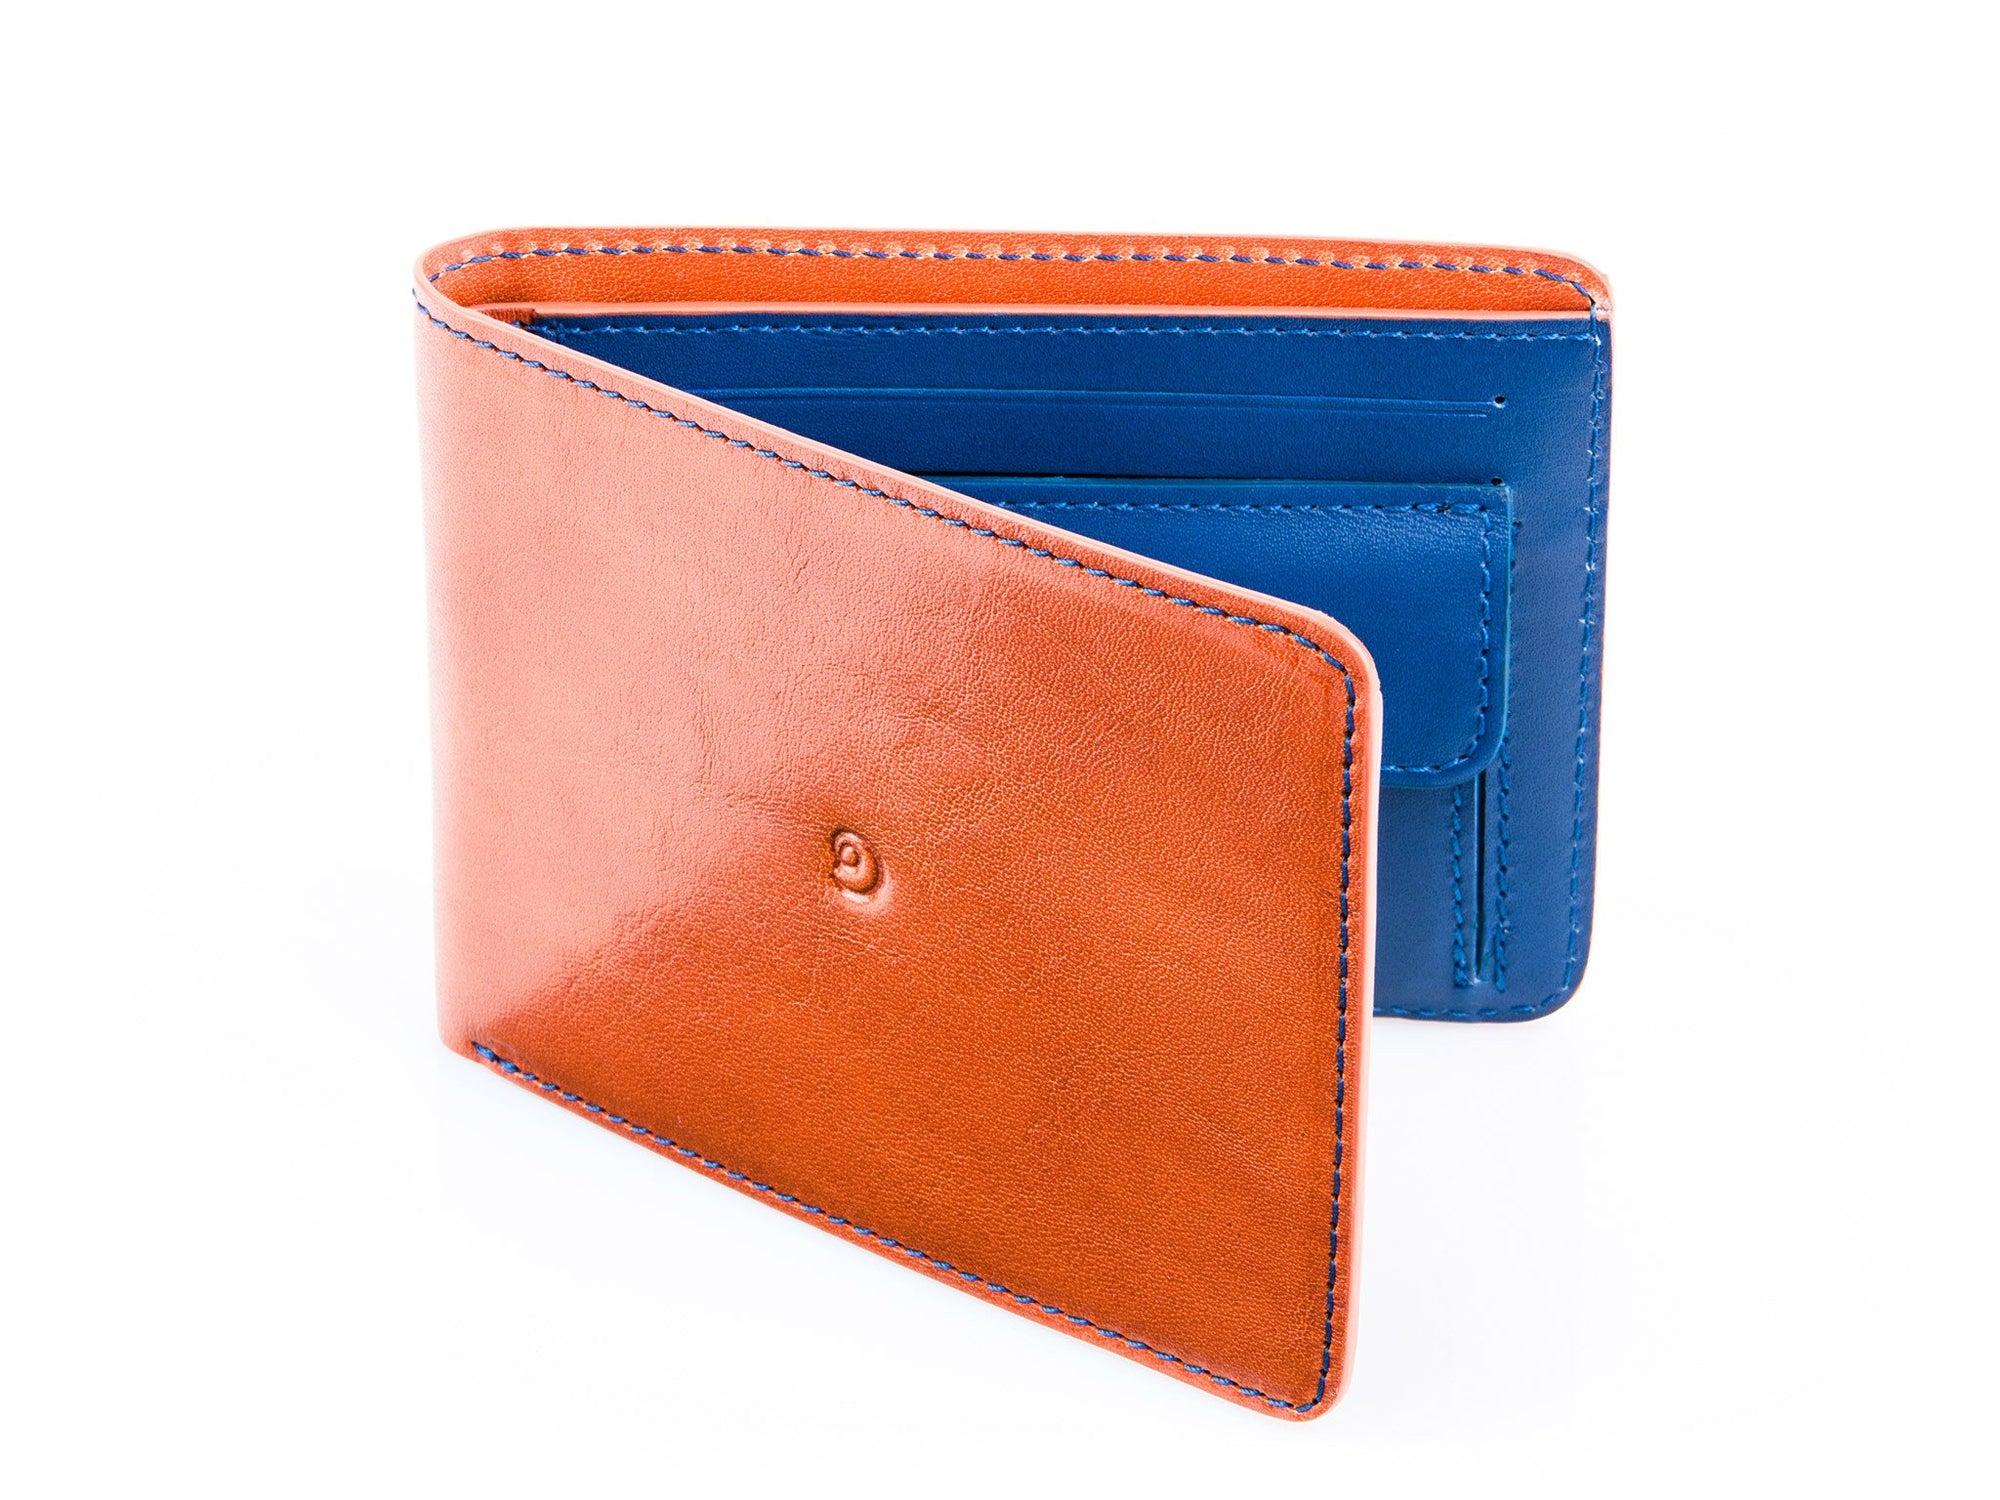 Danny P. Slim Leather Coin Wallet Tan Blue